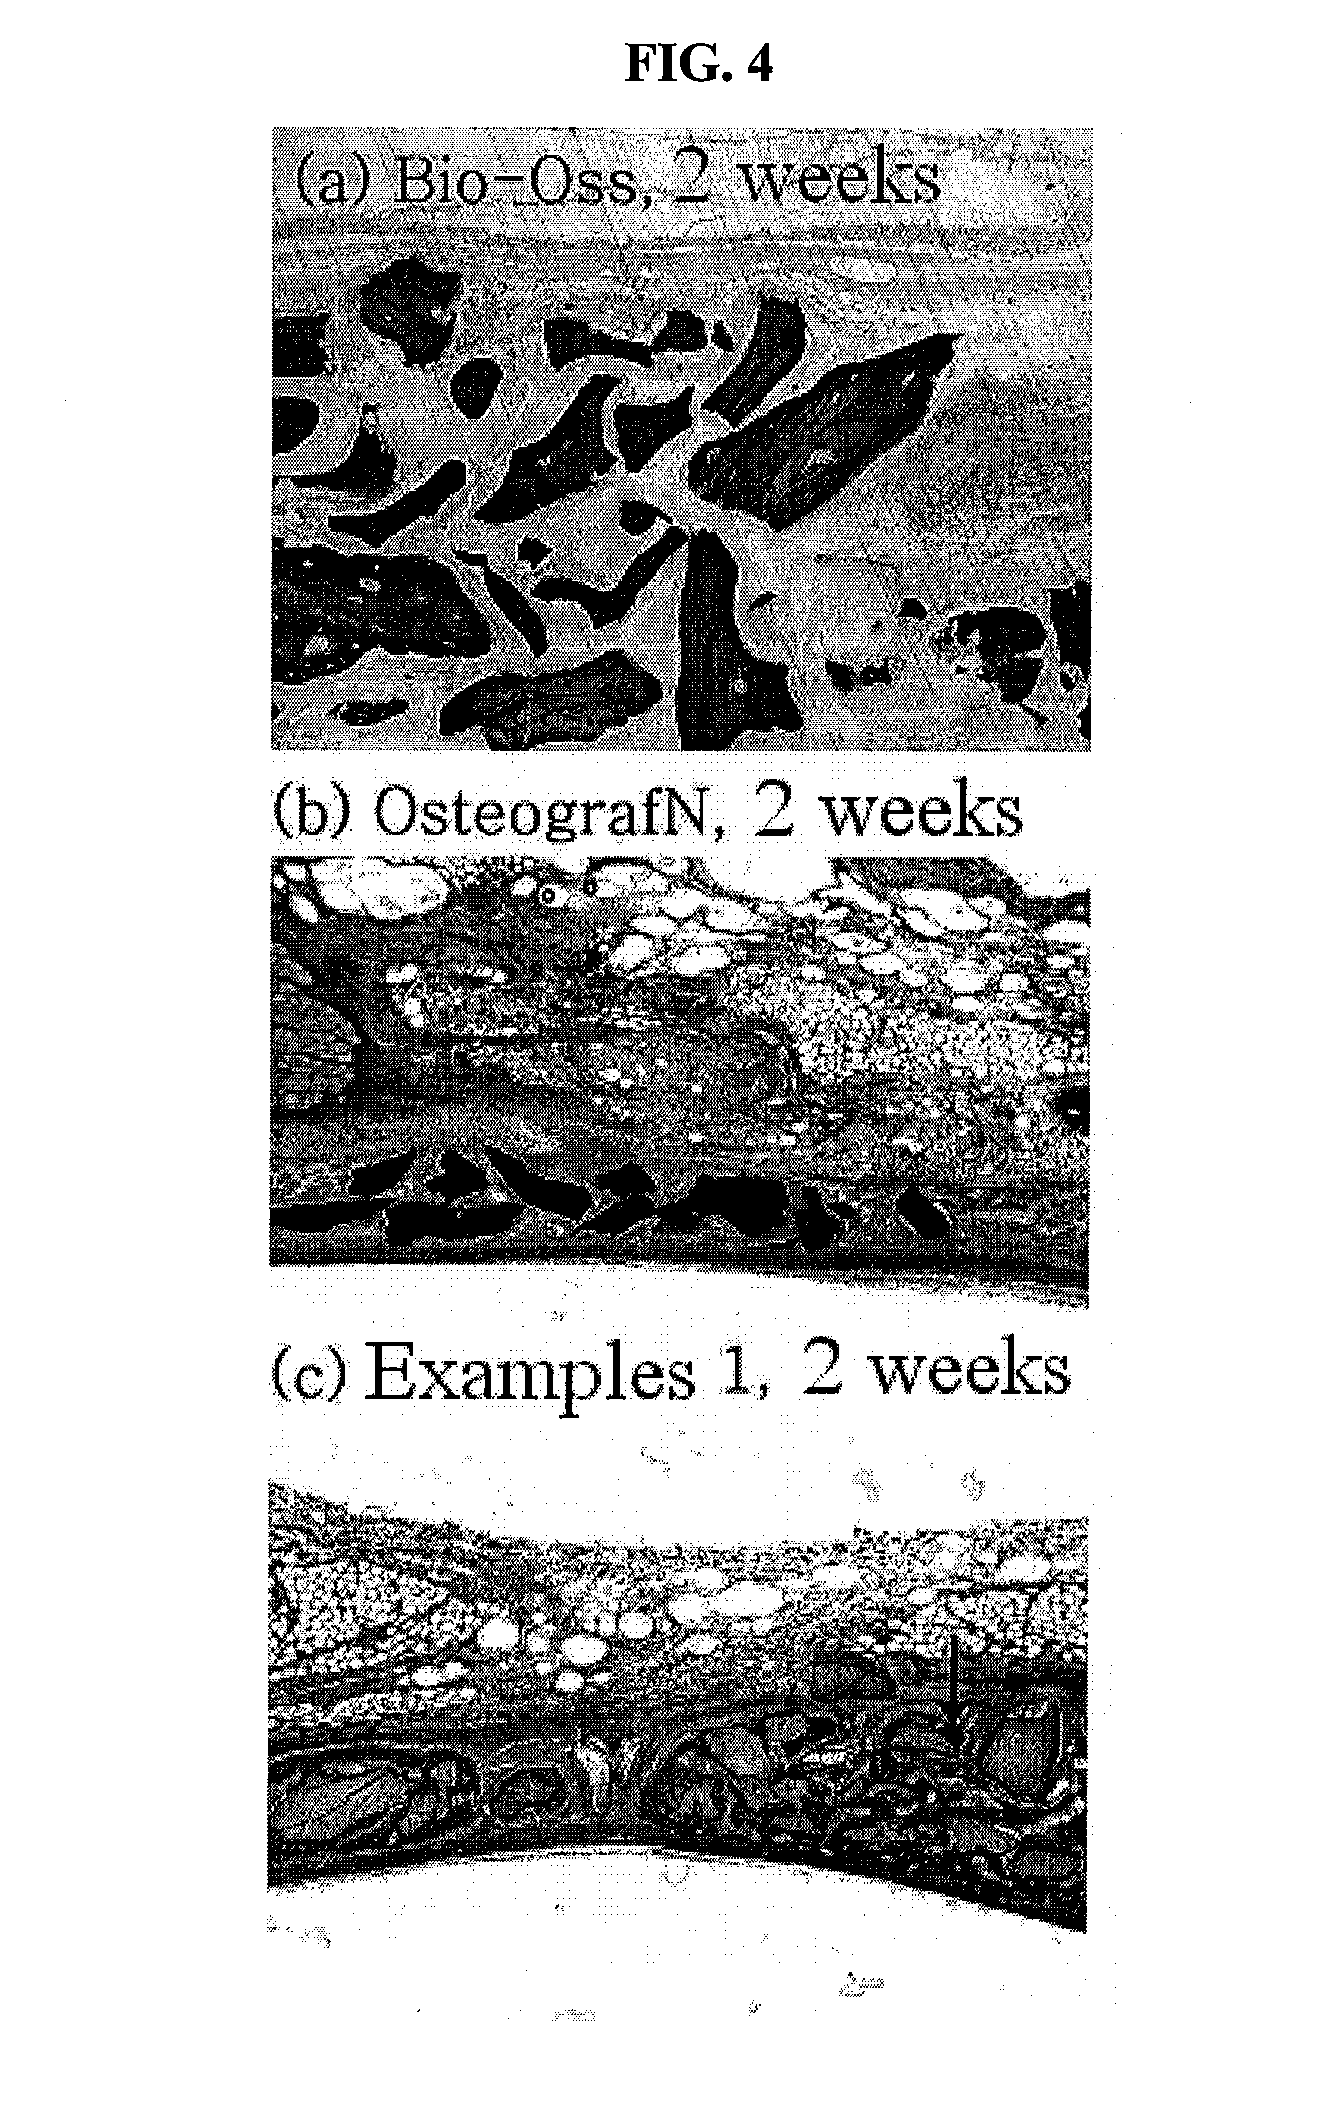 Method for preparing a prion-free bond grafting substitute